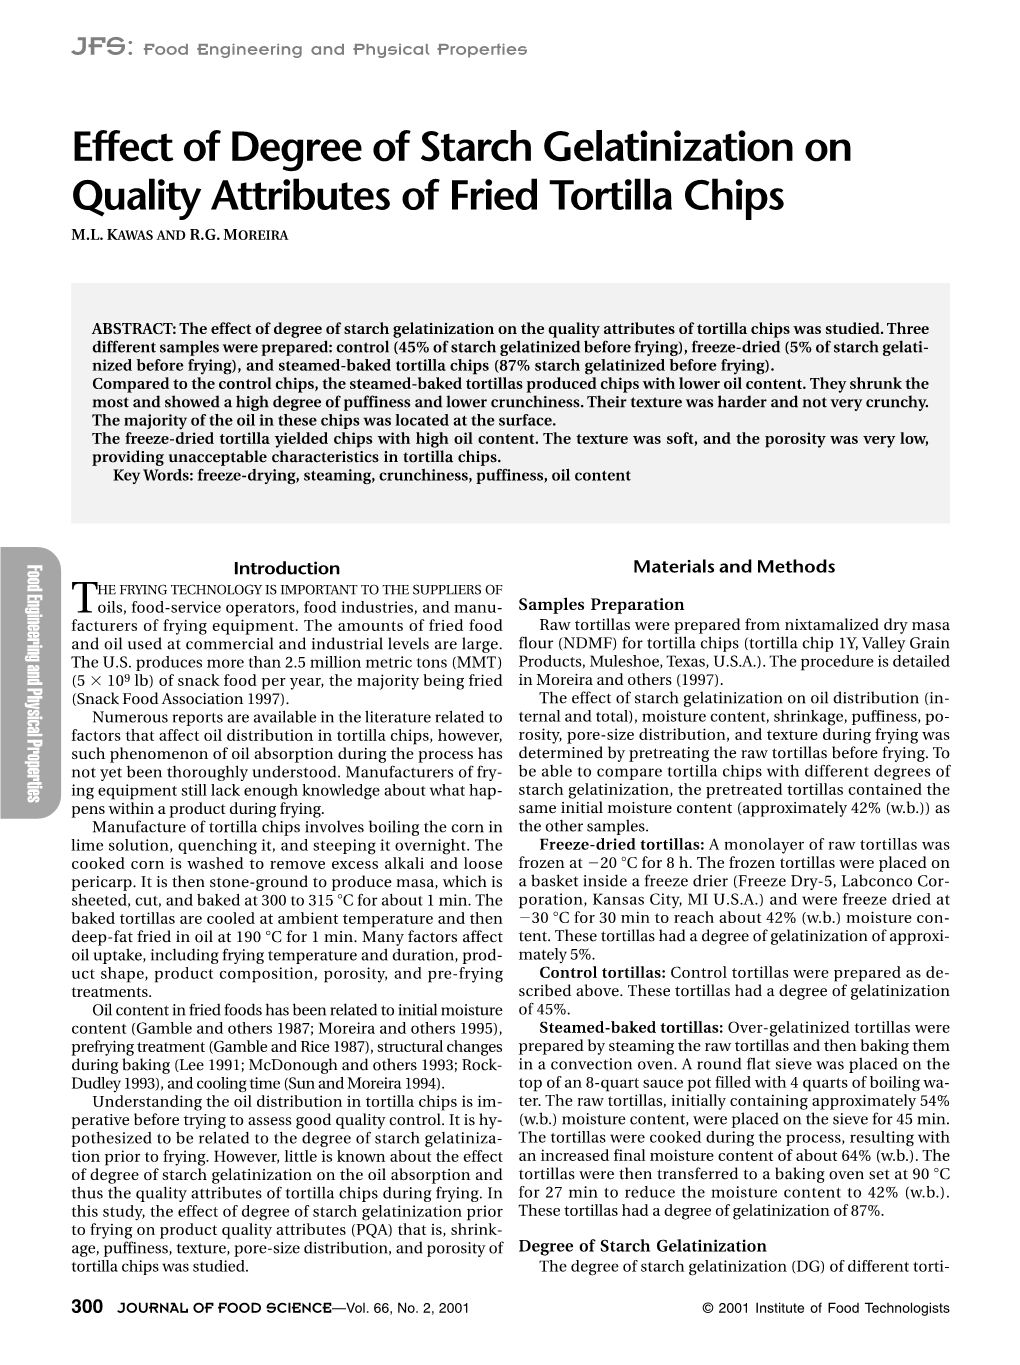 Effect of Degree of Starch Gelatinization on Quality Attributes of Fried Tortilla Chips M.L